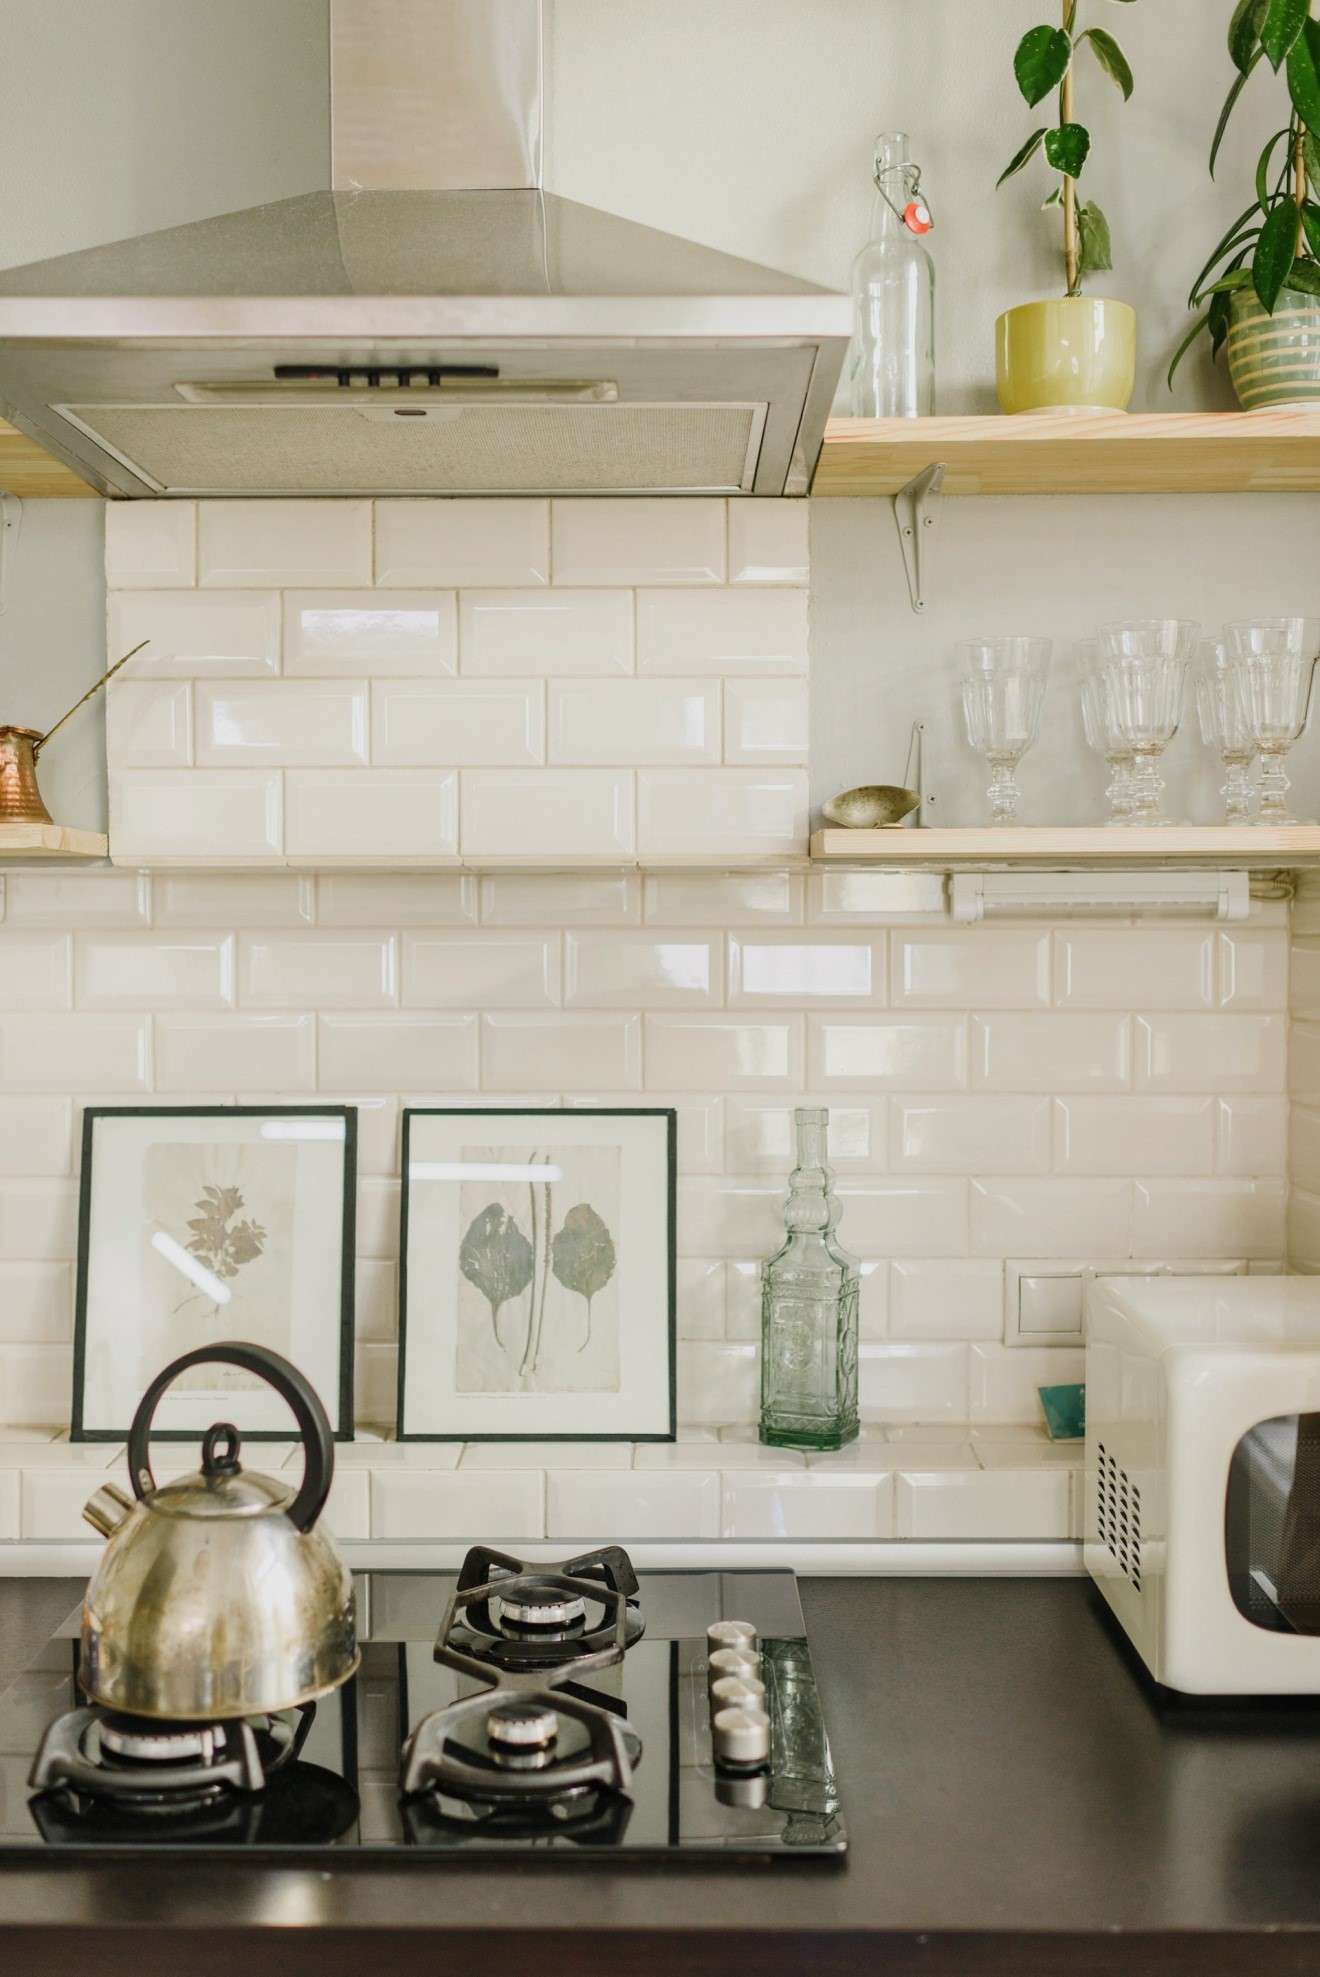 image - Leaning Kitchen Wall Décor